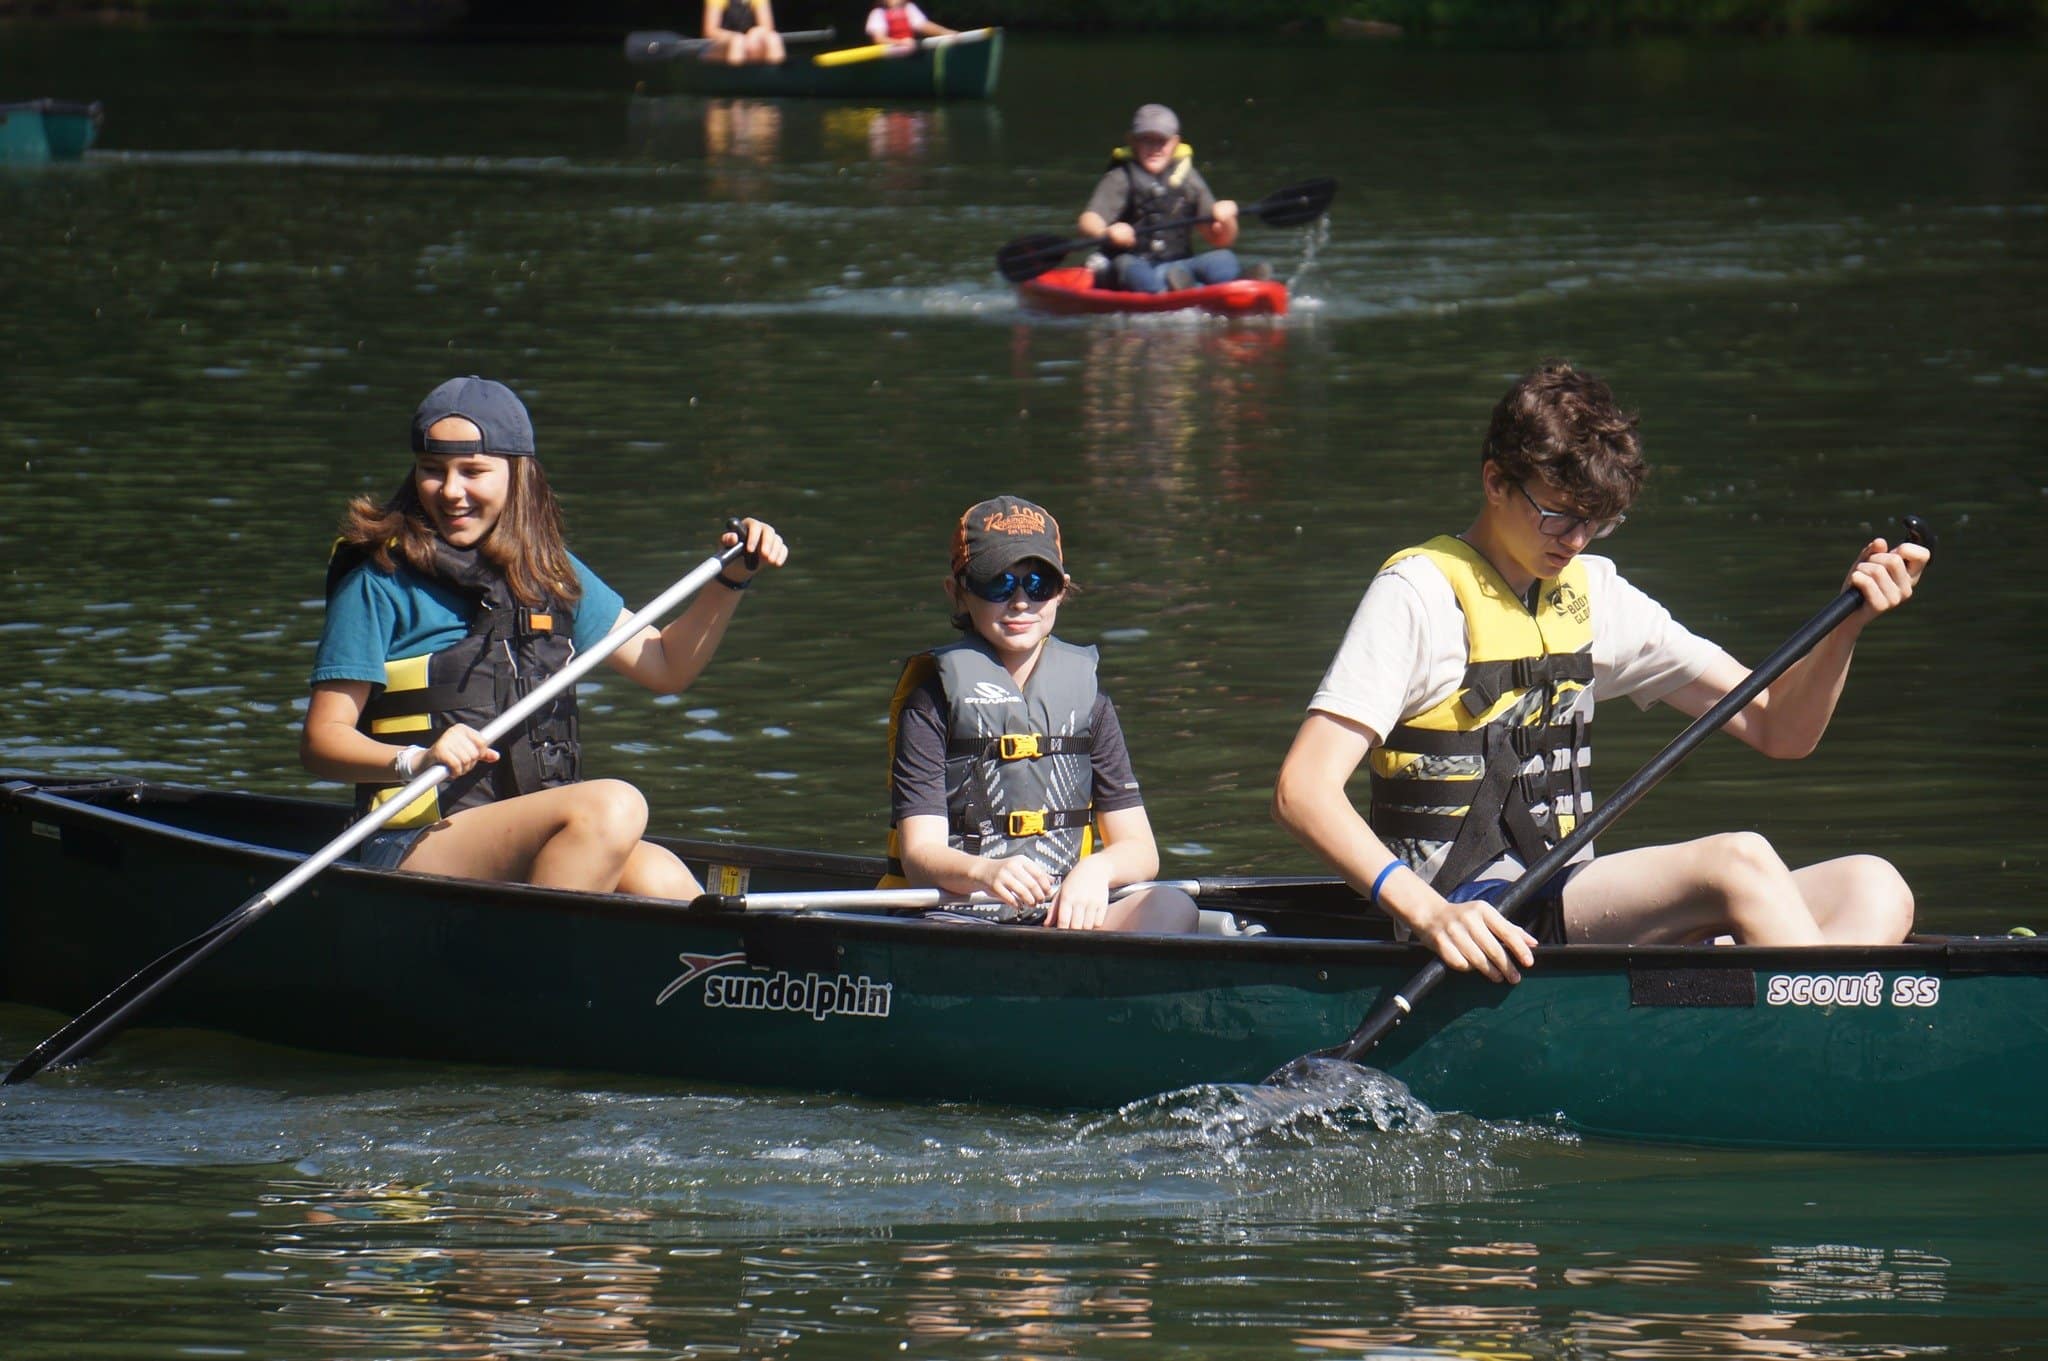 Campers enjoy canoeing on the lake at Blessed Carlo Acutis Youth Camp in Huttonsville, W.Va., in this undated photo. (OSV News photo/courtesy of Blessed Carlo Acutis Youth Camp)